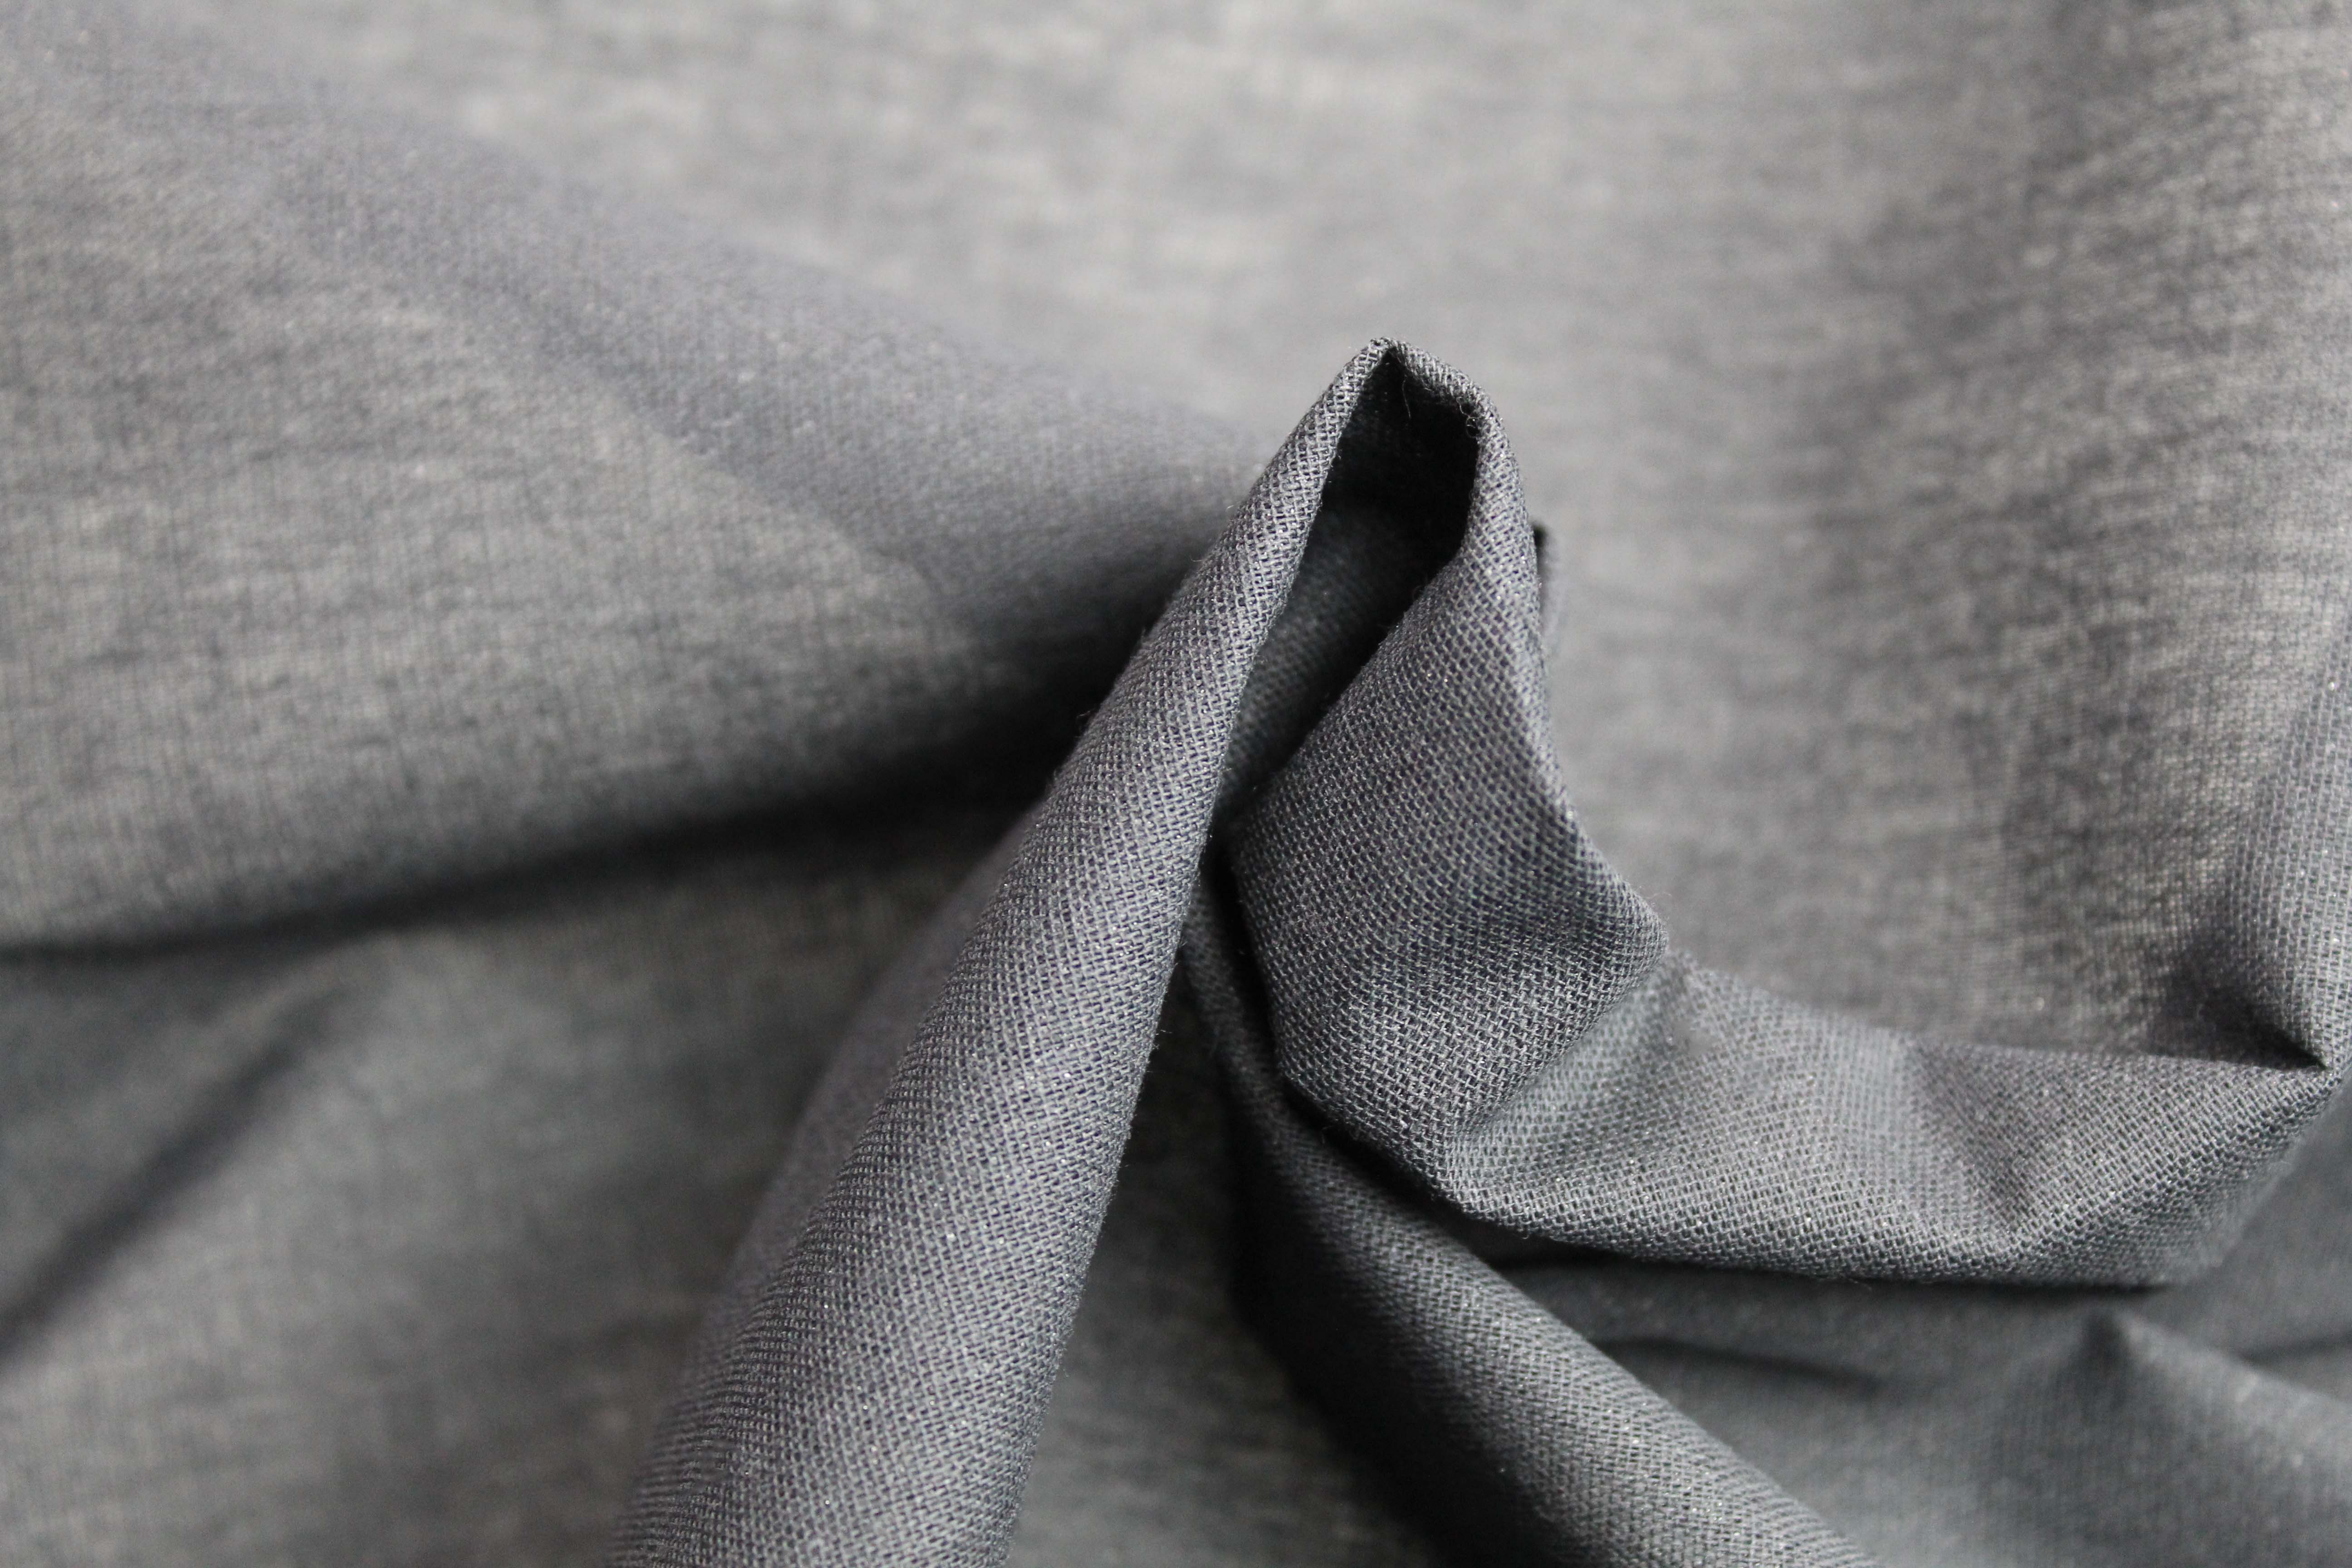 M/WT WOVEN IRON ON INTERFACING - 4750 - CHARCOAL